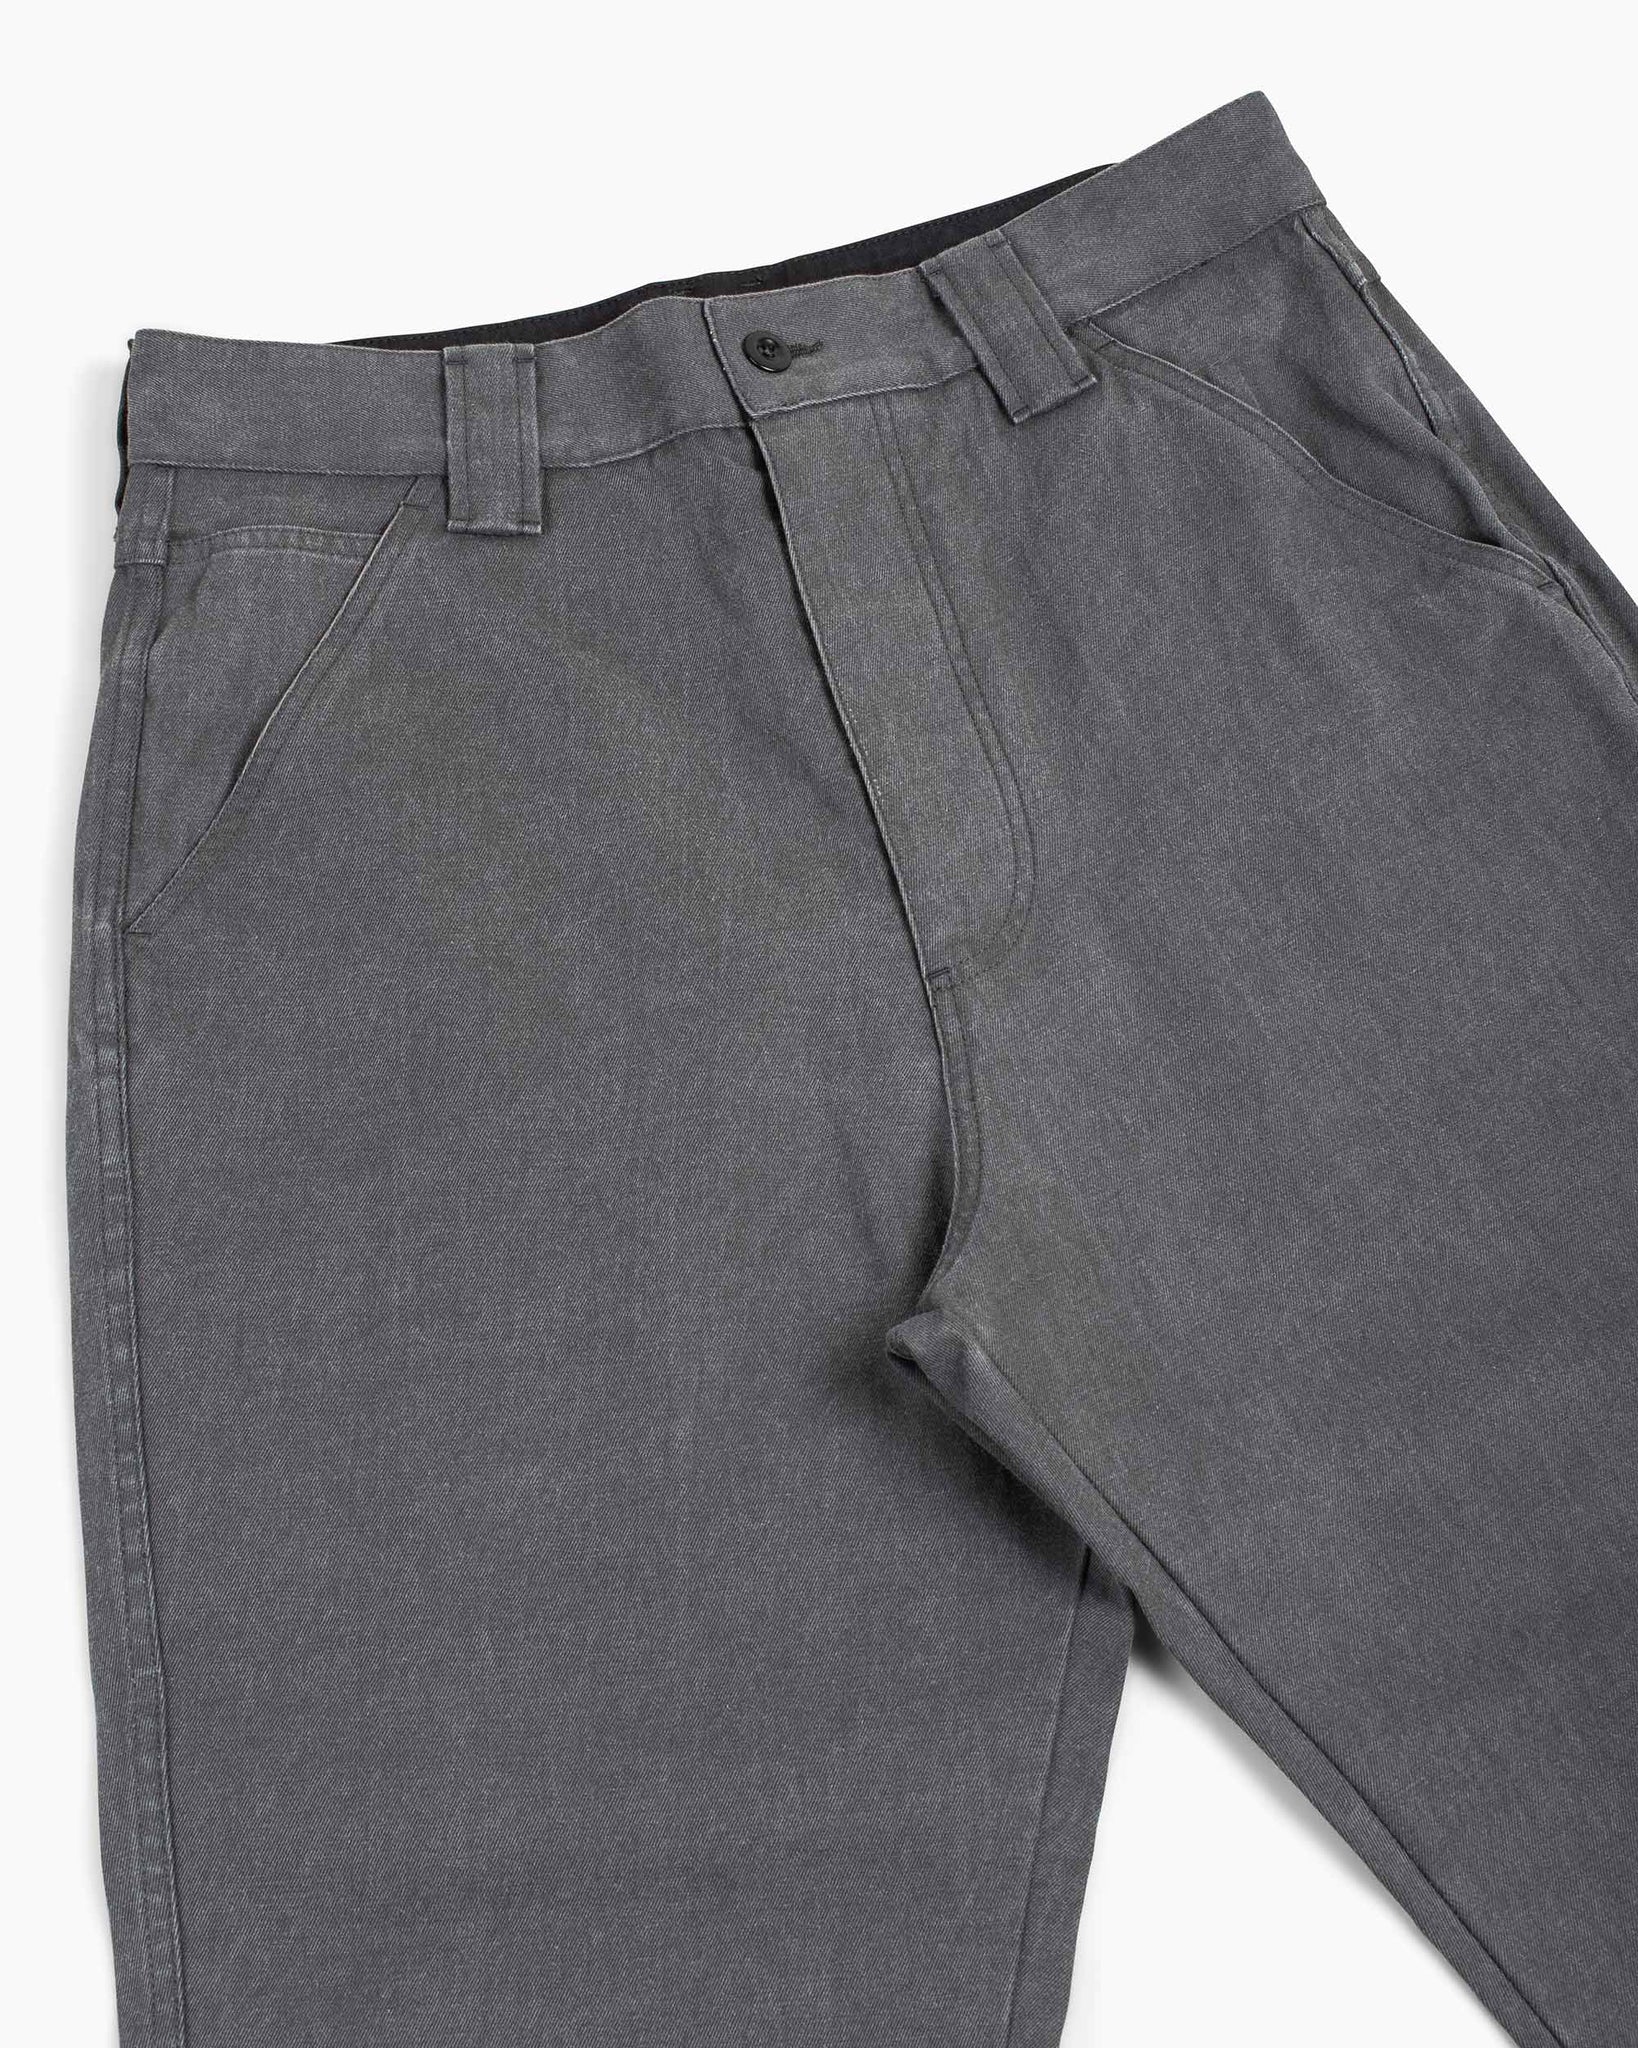 MHL Dropped Pocket Trouser Soft Cotton Drill Lead Details